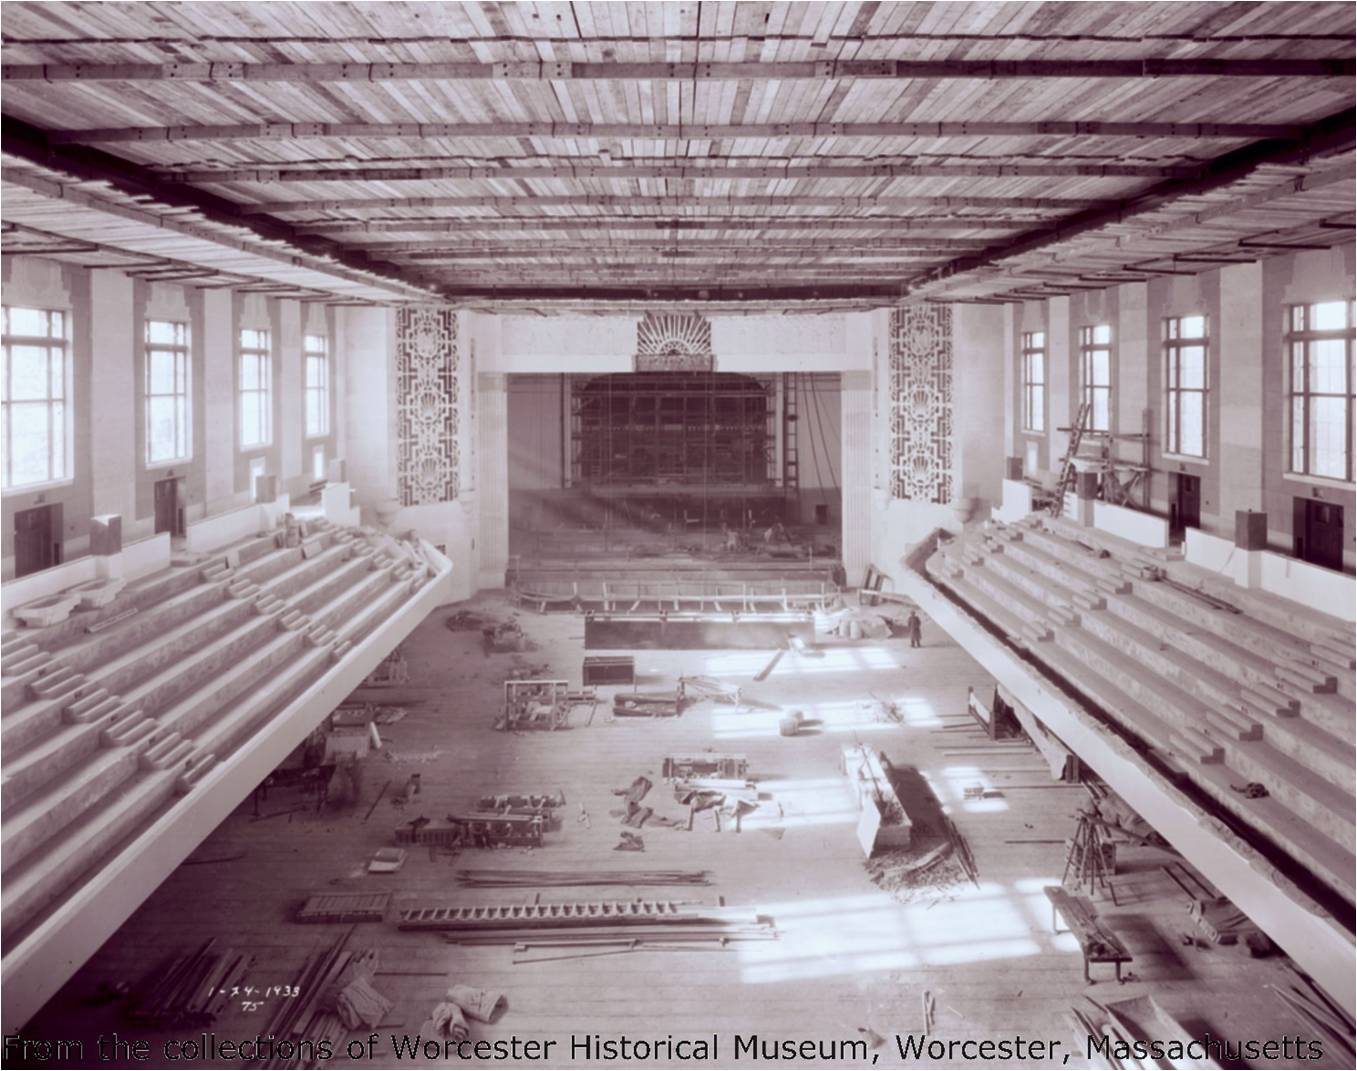 The Worcester Memorial Auditorium under construction (From the collection of the Worcester Historical Museum, Worcester, Massachusetts)